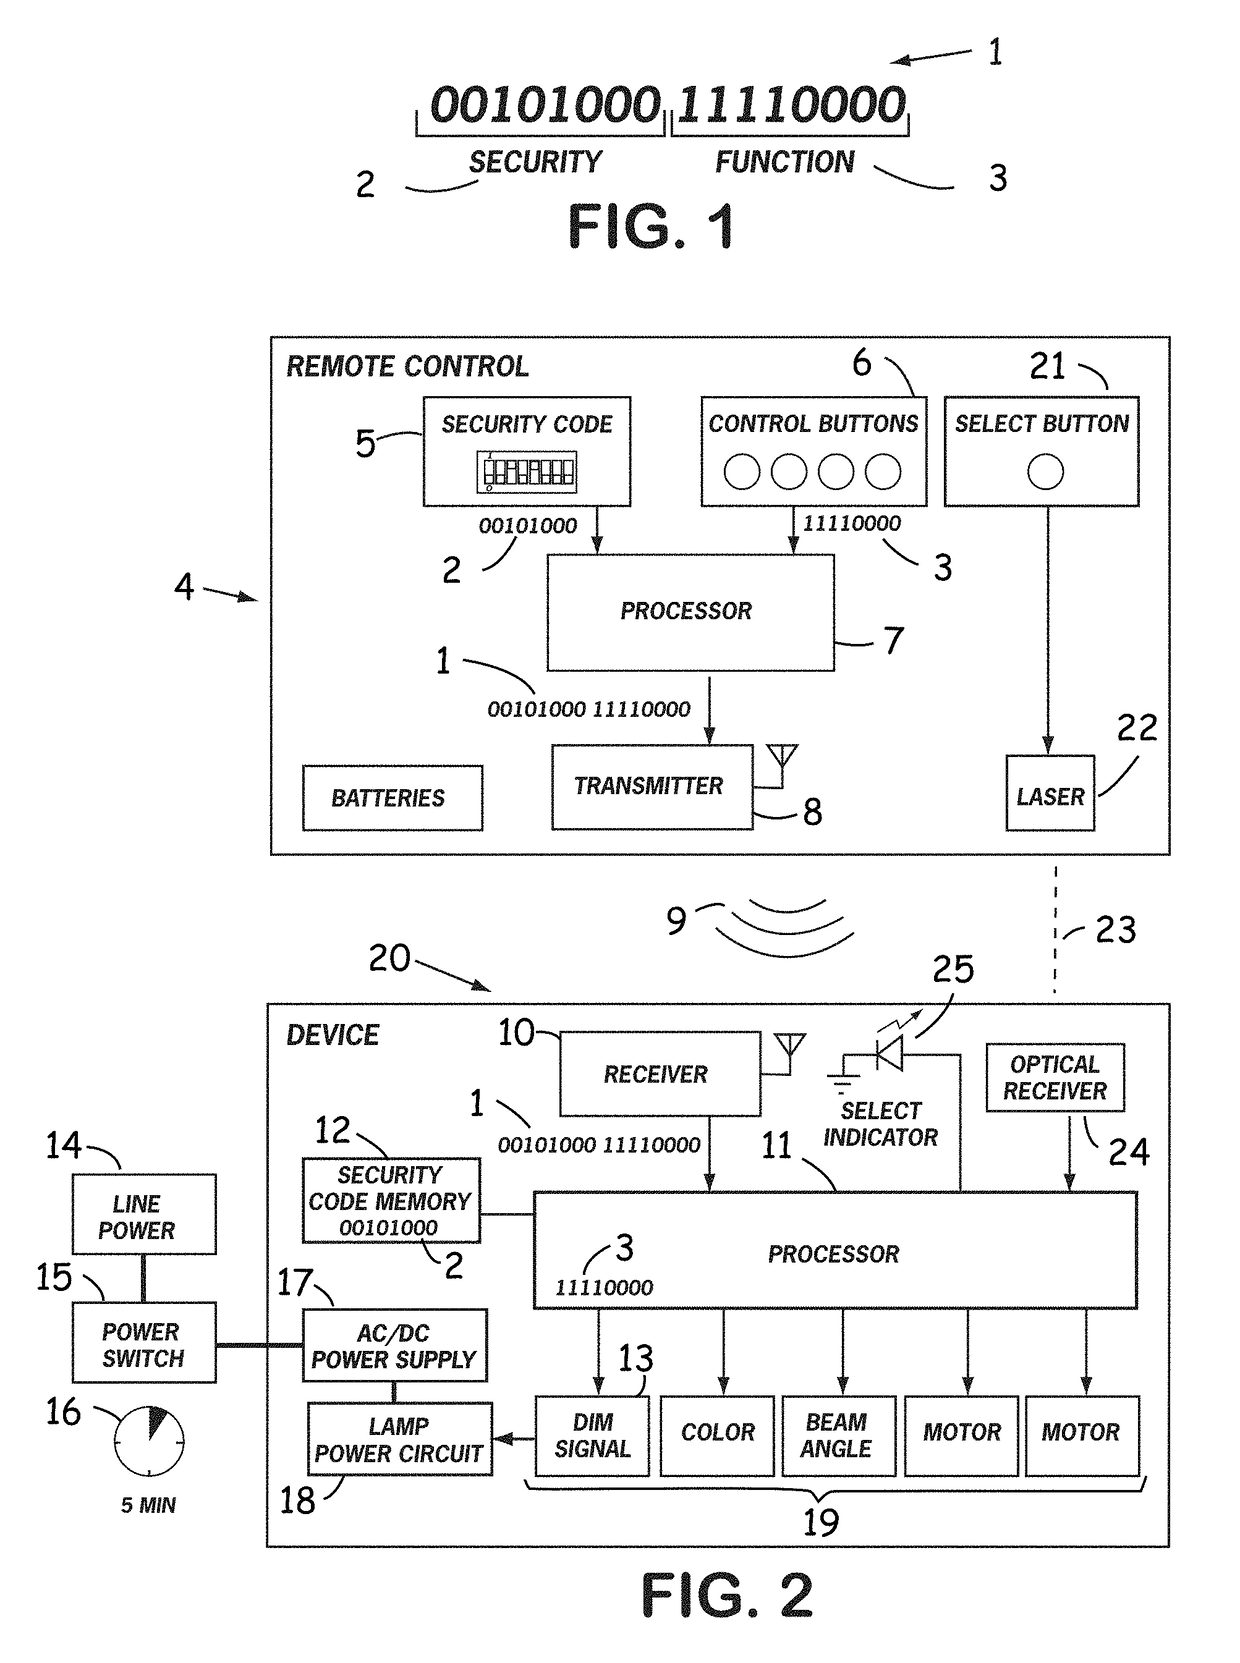 Method for adding a security code to multiple receivers during power-up